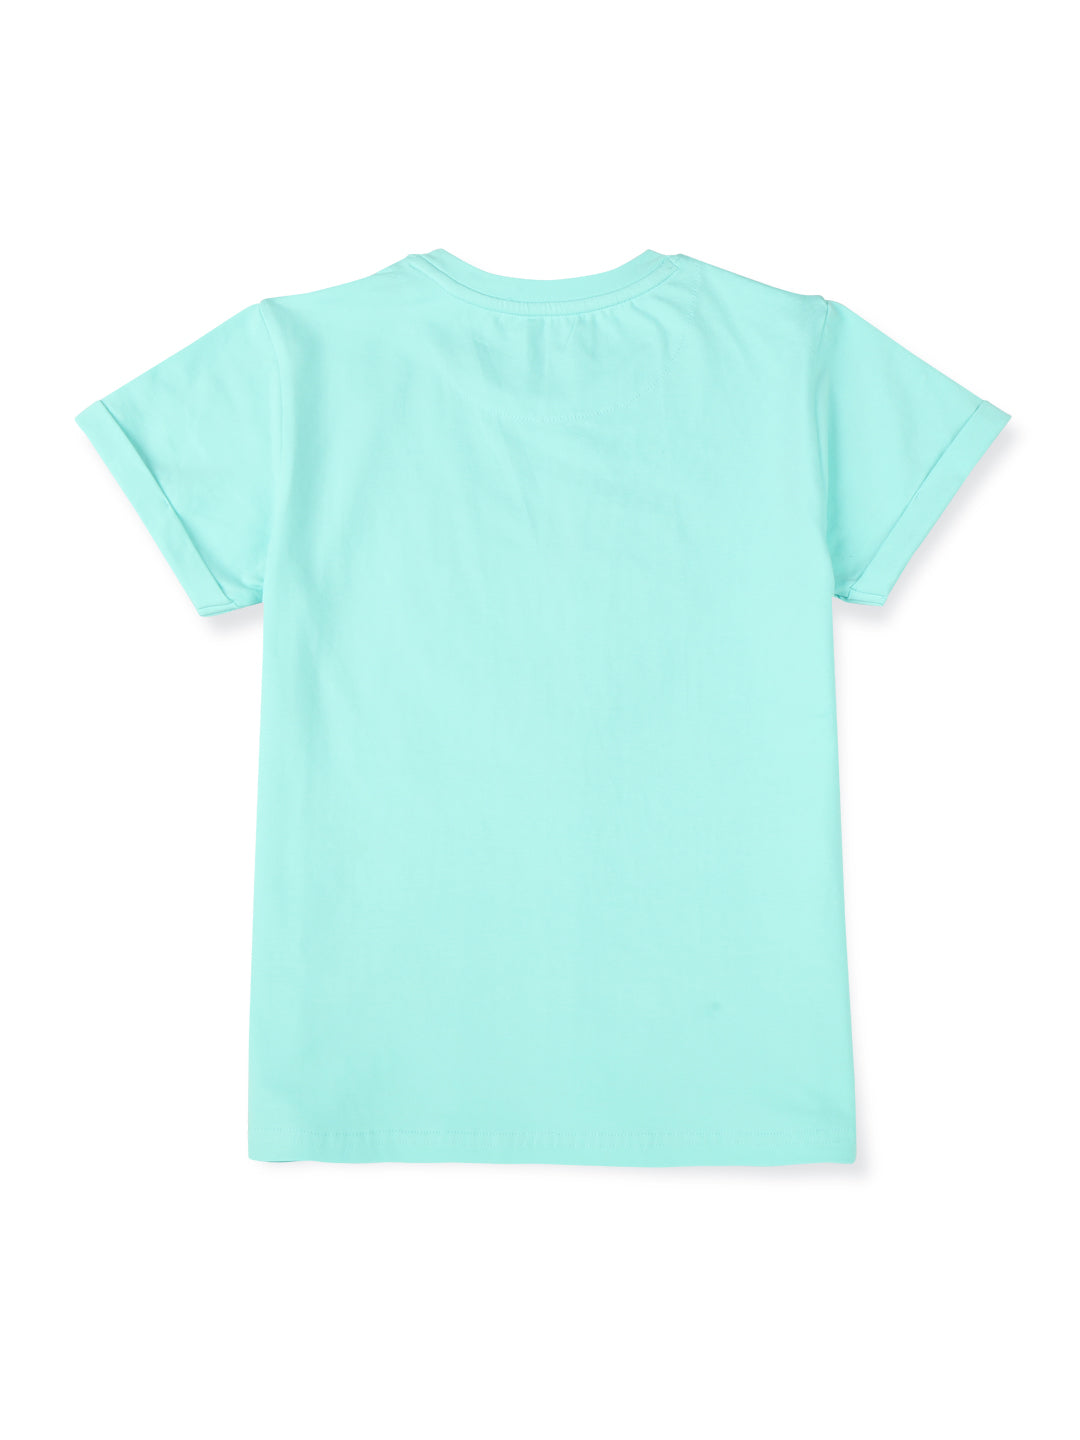 Girls Turquoise Cotton Solid Knits Top